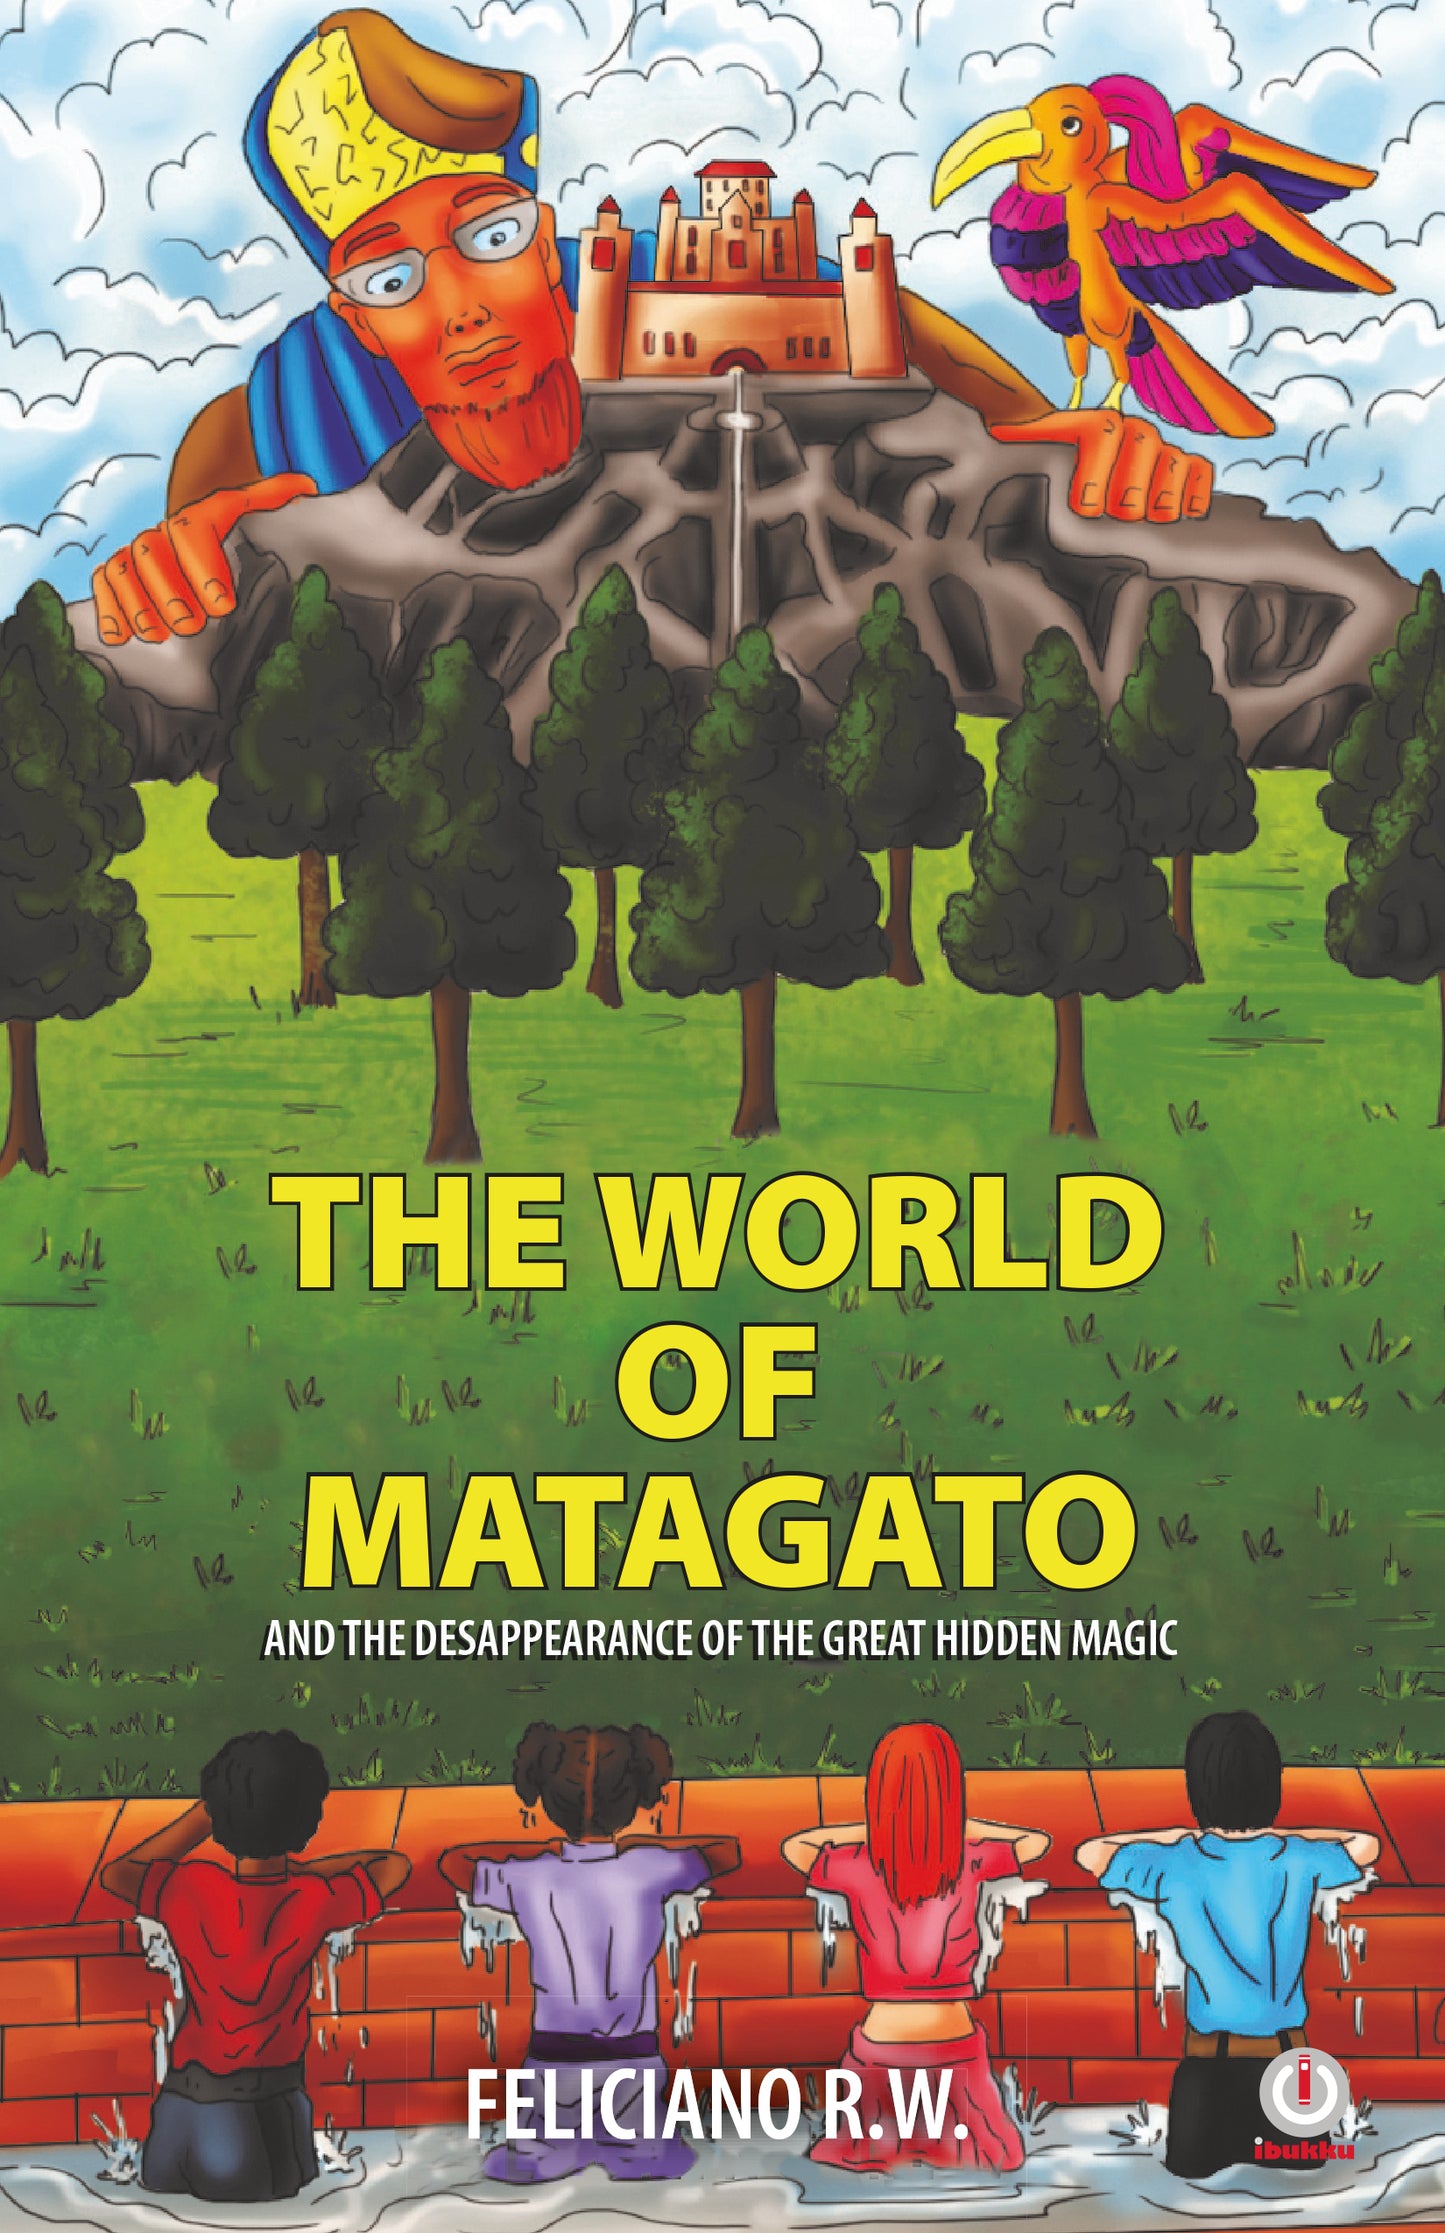 The World Of Matagato: And The Desappearance Of The Great Hidden Magic